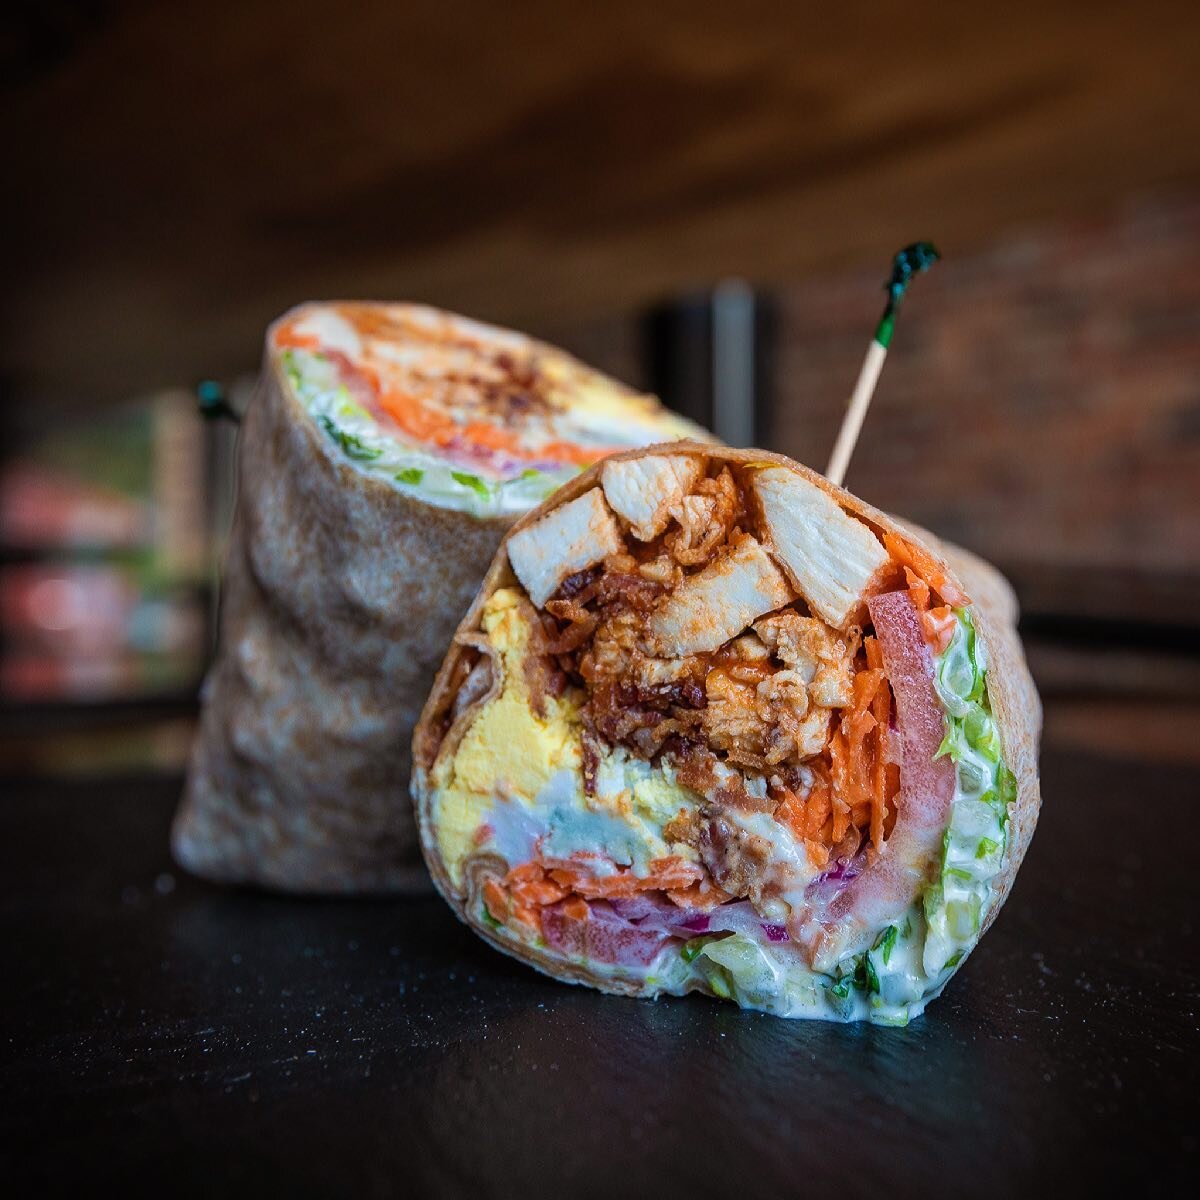 Take a look at Friday&rsquo;s Lunch Special. The Buffalo Cobb Wrap! Grilled buffalo chicken, hard boiled egg, bacon, tomato, carrots, onion, lettuce, blue cheese crumbles and ranch dressing all wrapped up! On the breakfast tip, The Top o&rsquo; The M